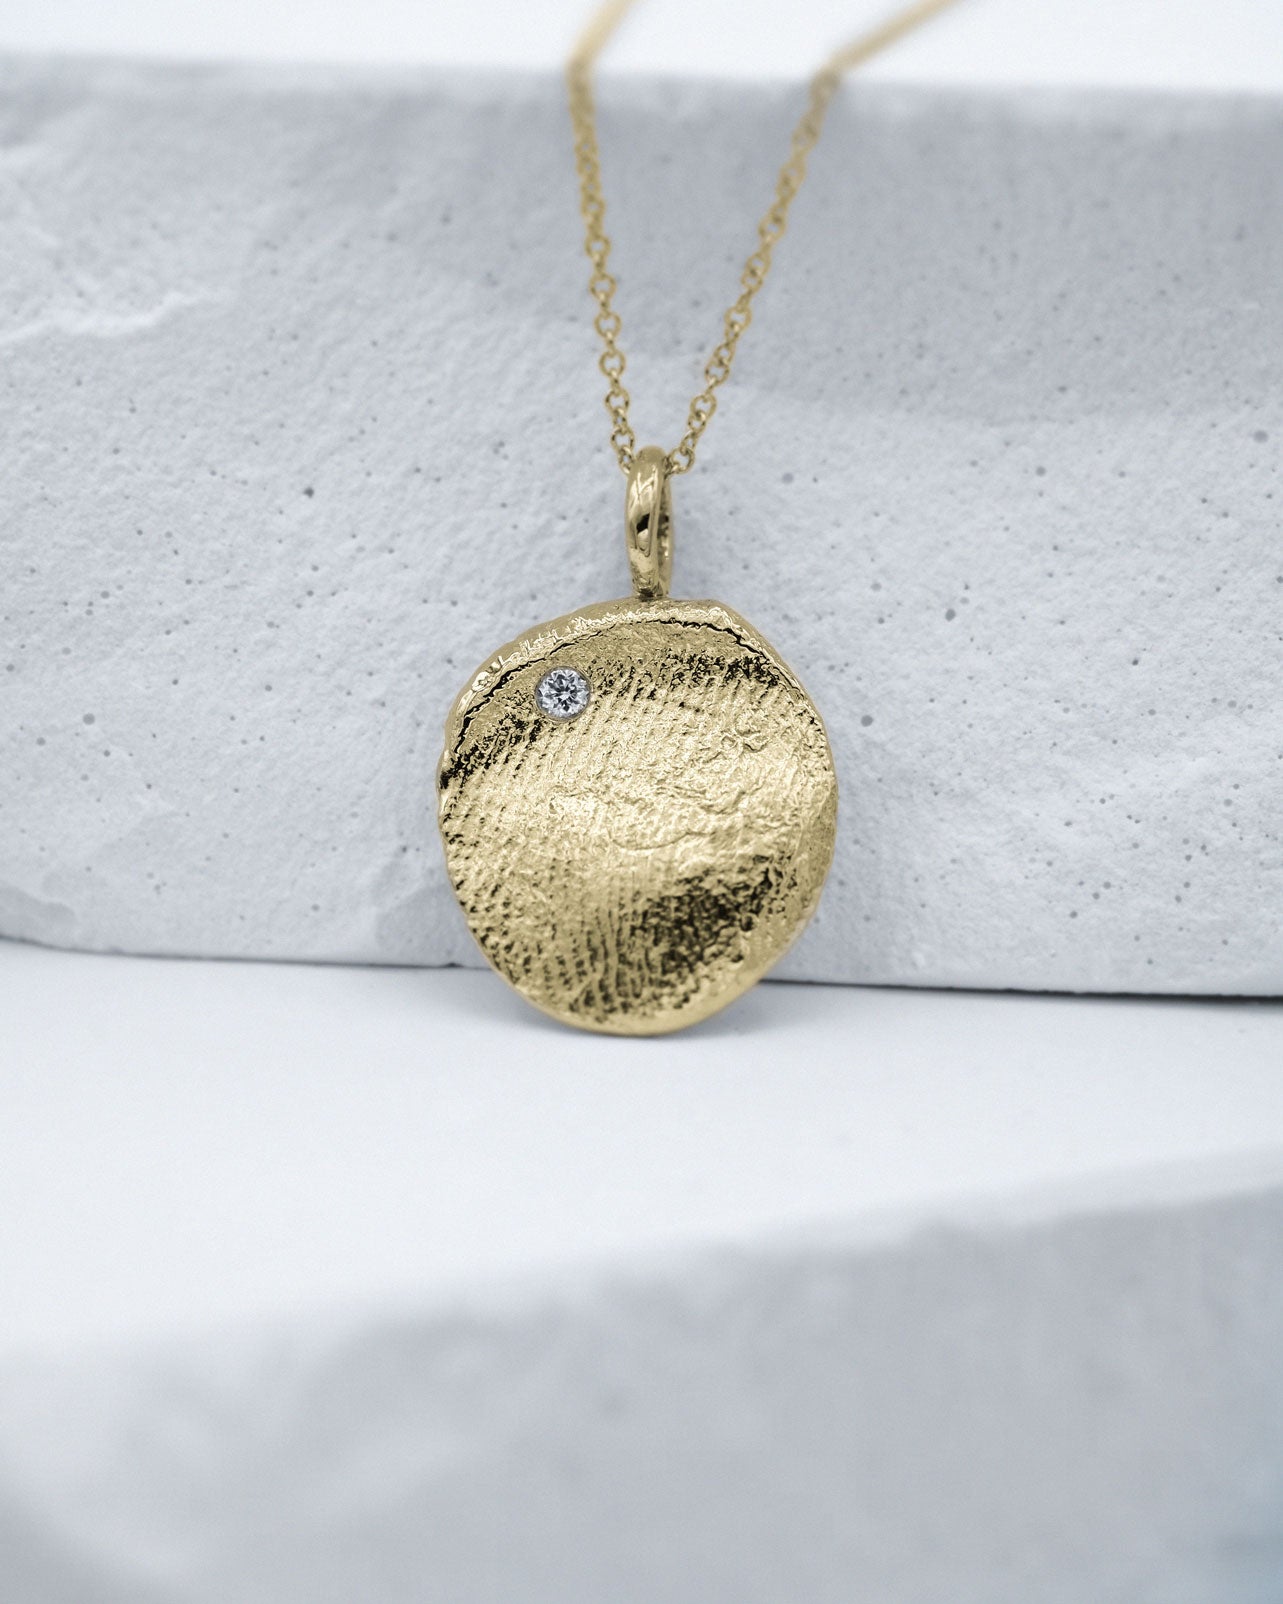 Fingerprint Necklace in solid gold with a Diamond